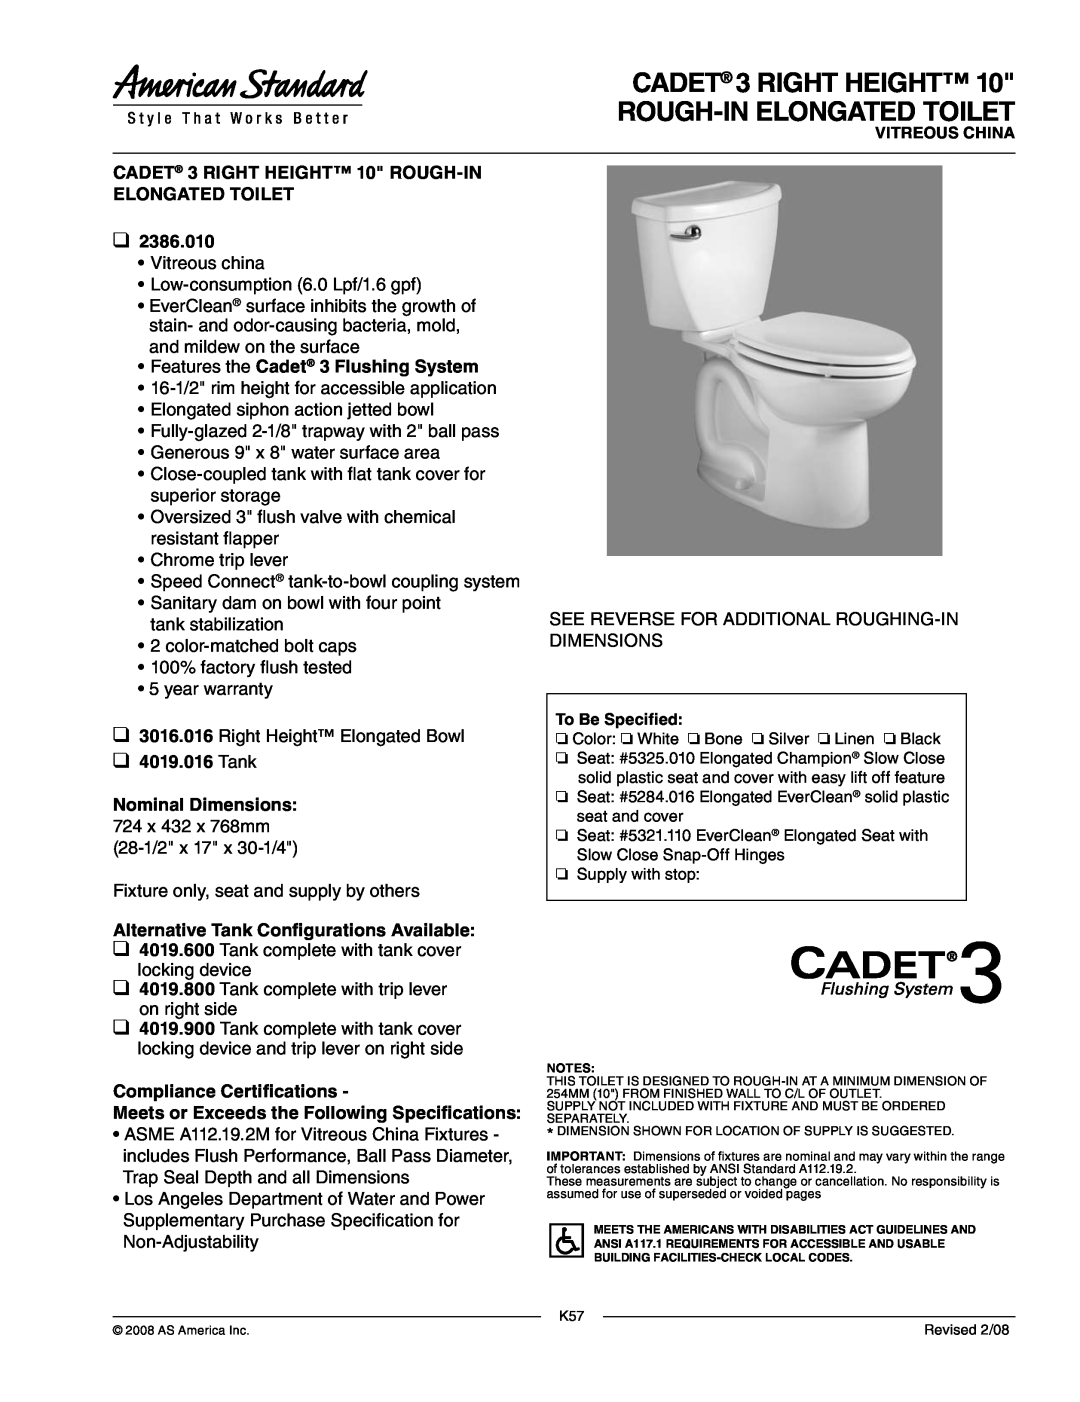 American Standard 2386.010 dimensions CADET 3 RIGHT HEIGHT Rough-inELONGATED TOILET, Features the Cadet 3 Flushing System 